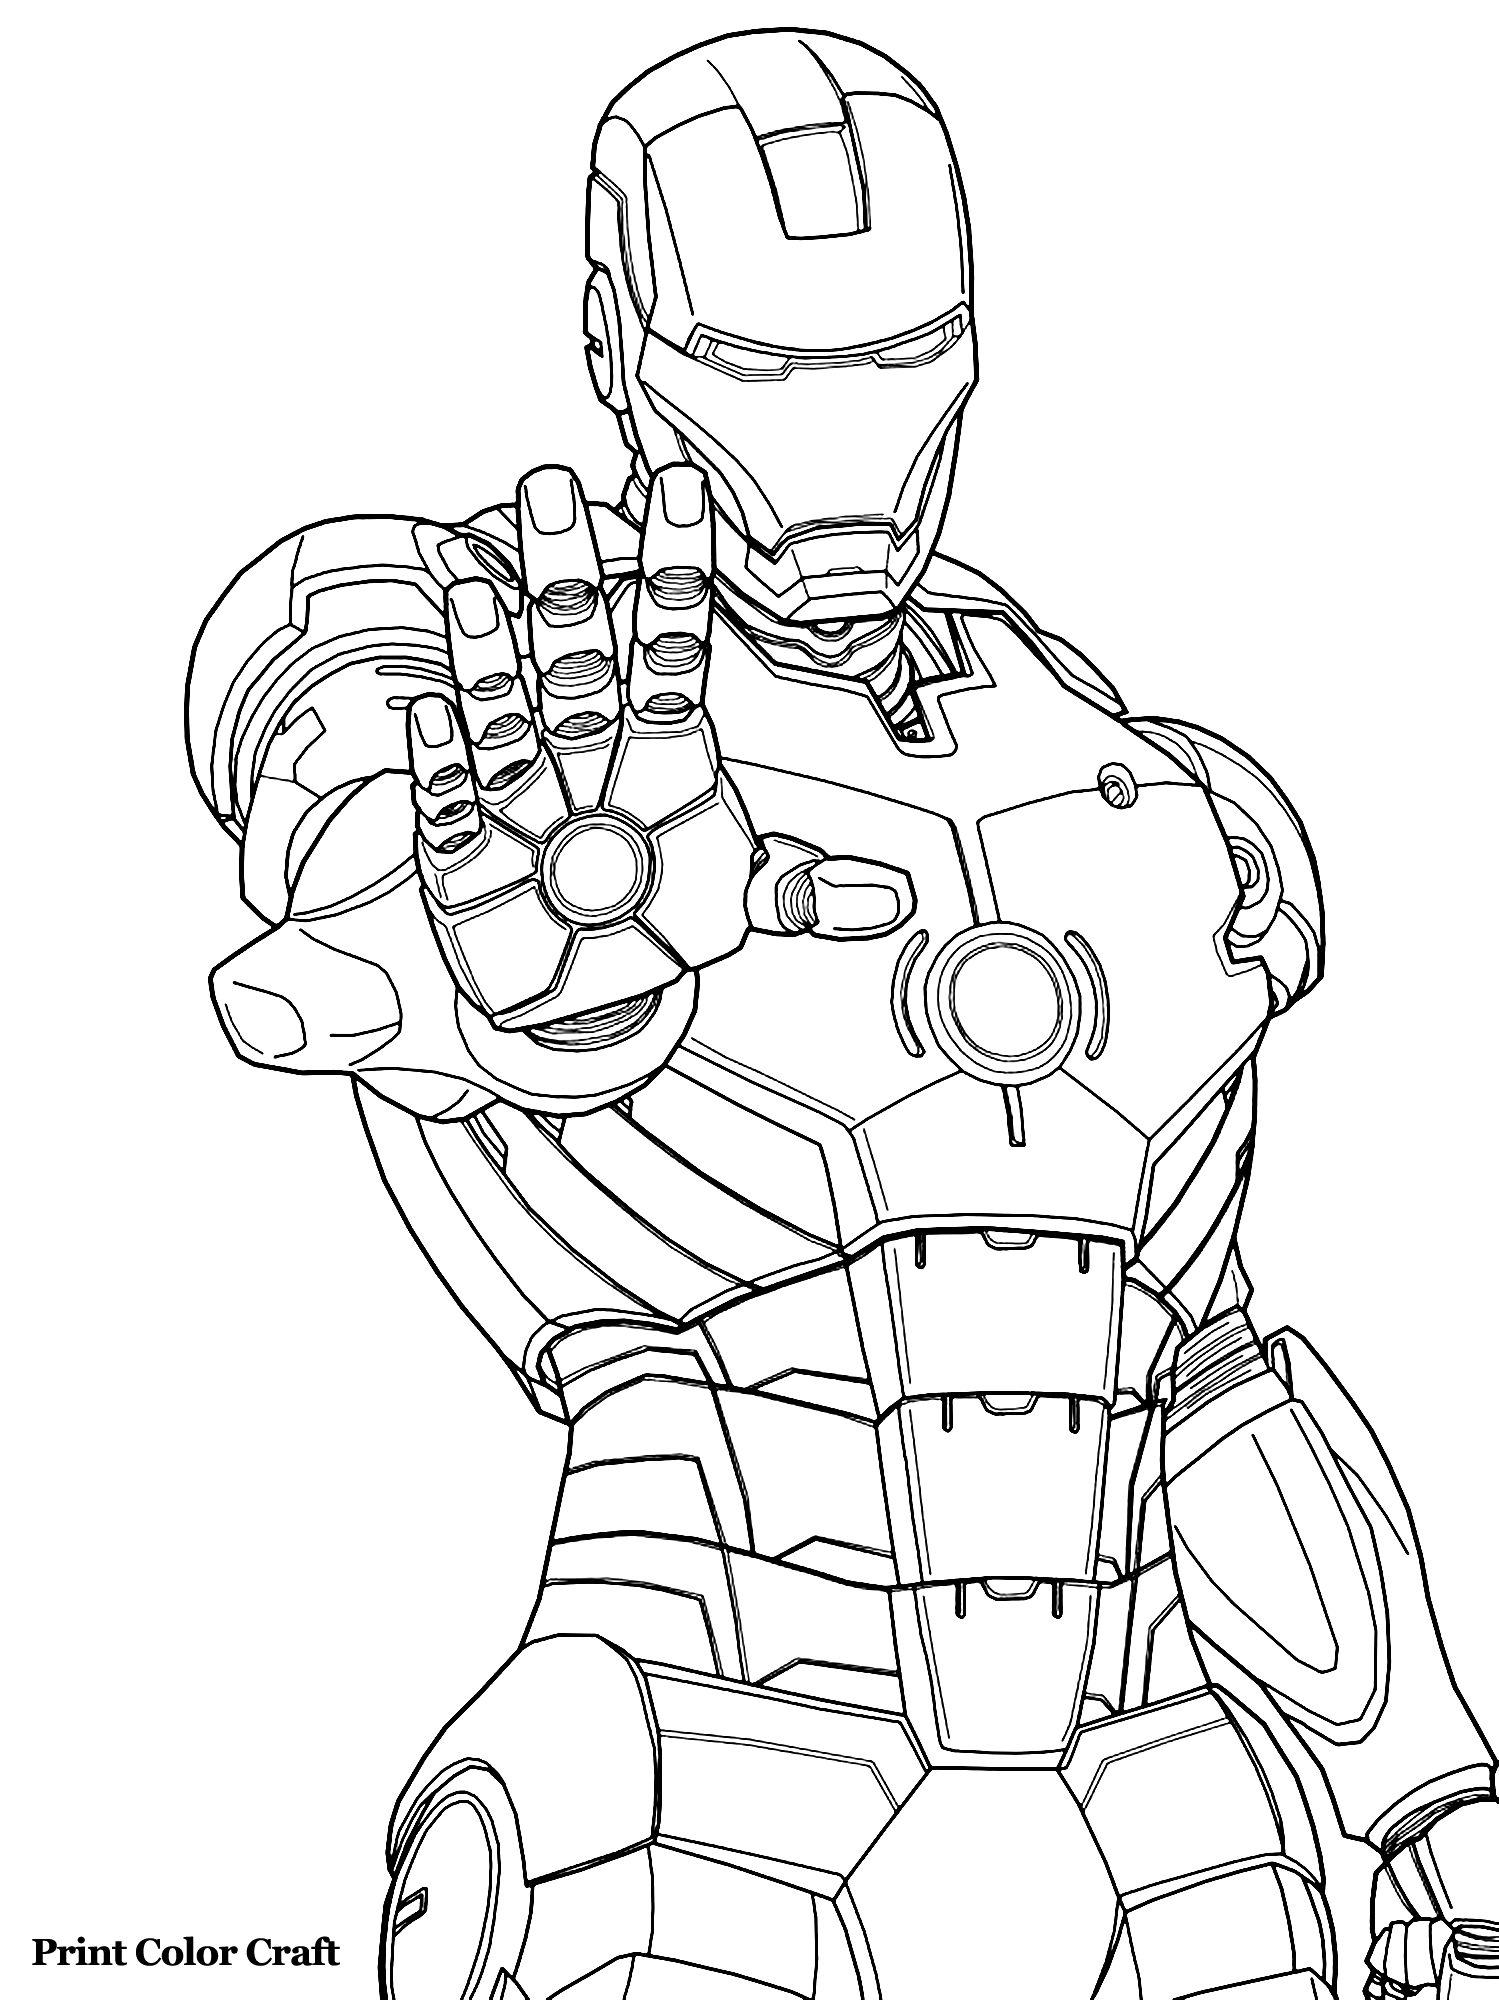 Iron Man Coloring Pages: Printable PDF